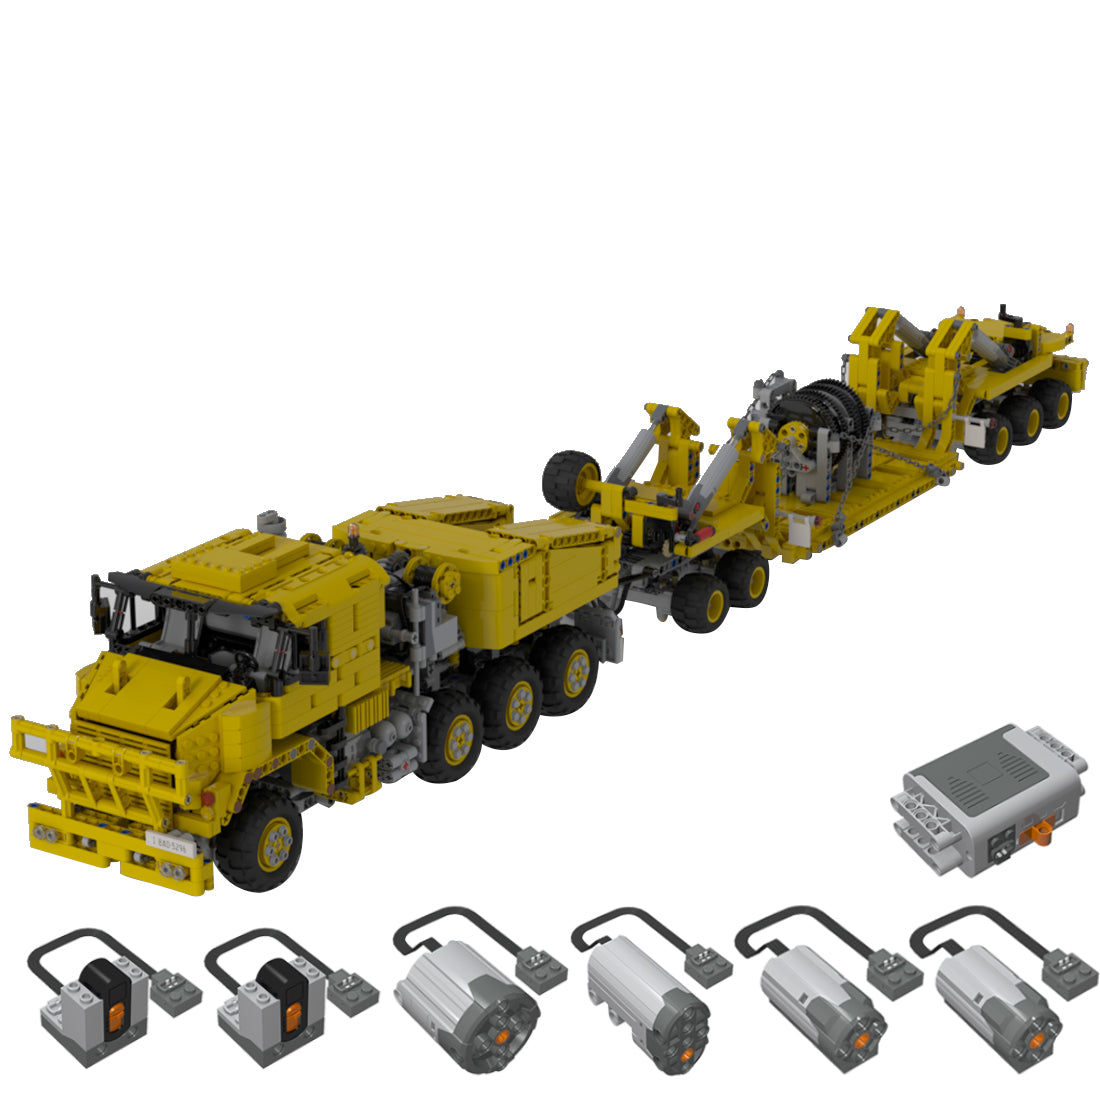 Dynamic Heavy Equipment Transporter with Suspension